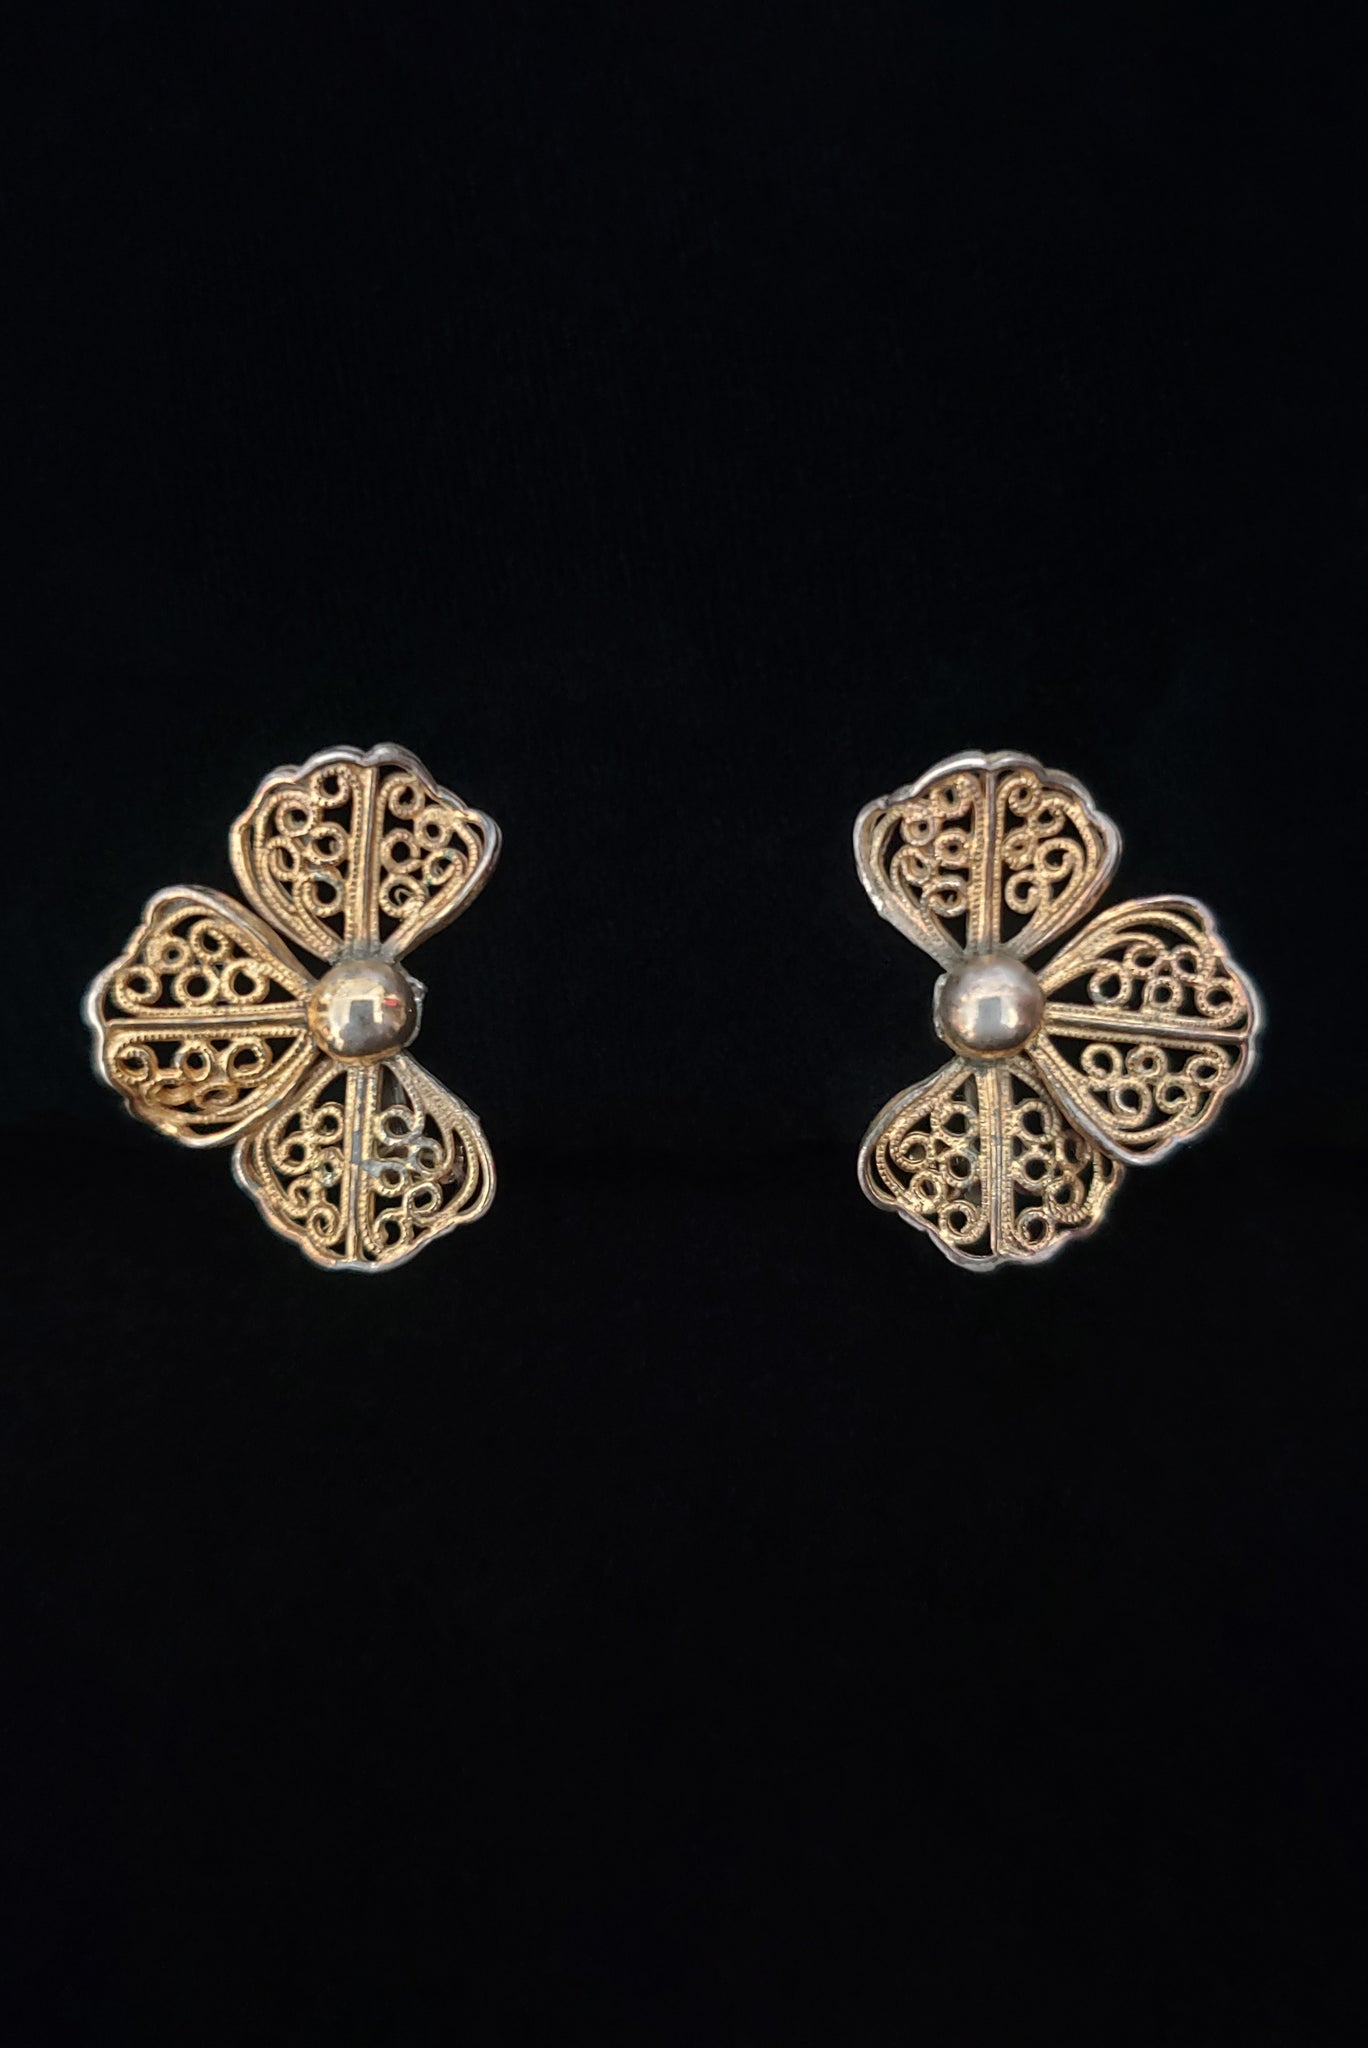 1950s Vintage Gold Tone Floral Three Petal Filigree Clip-On Earrings by Lisner